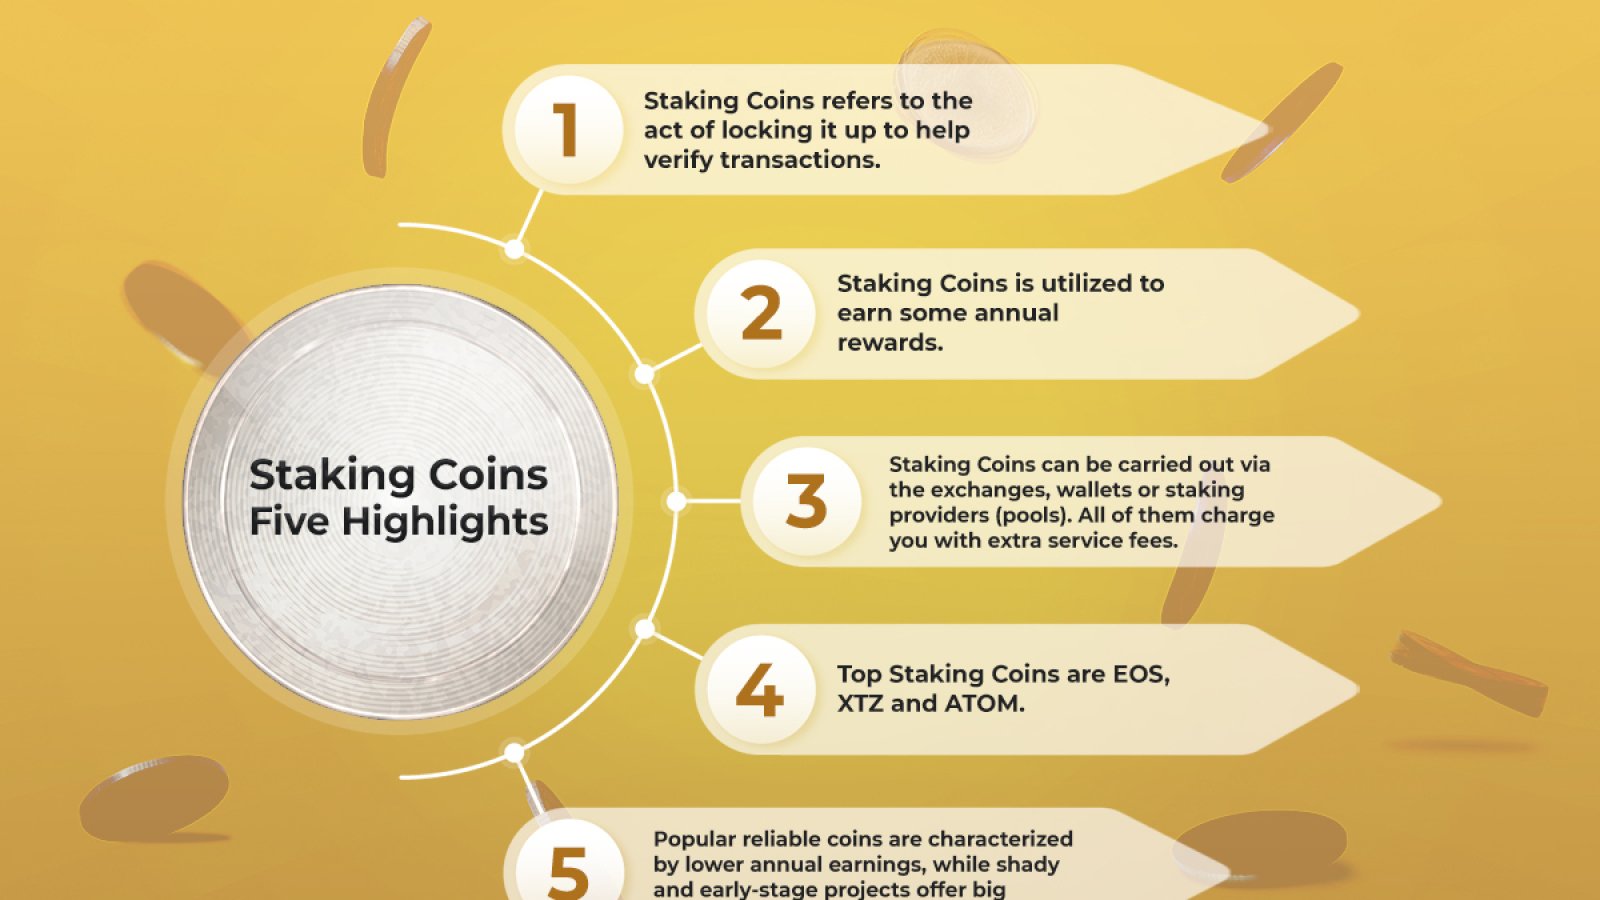 Coins Staking Highlights